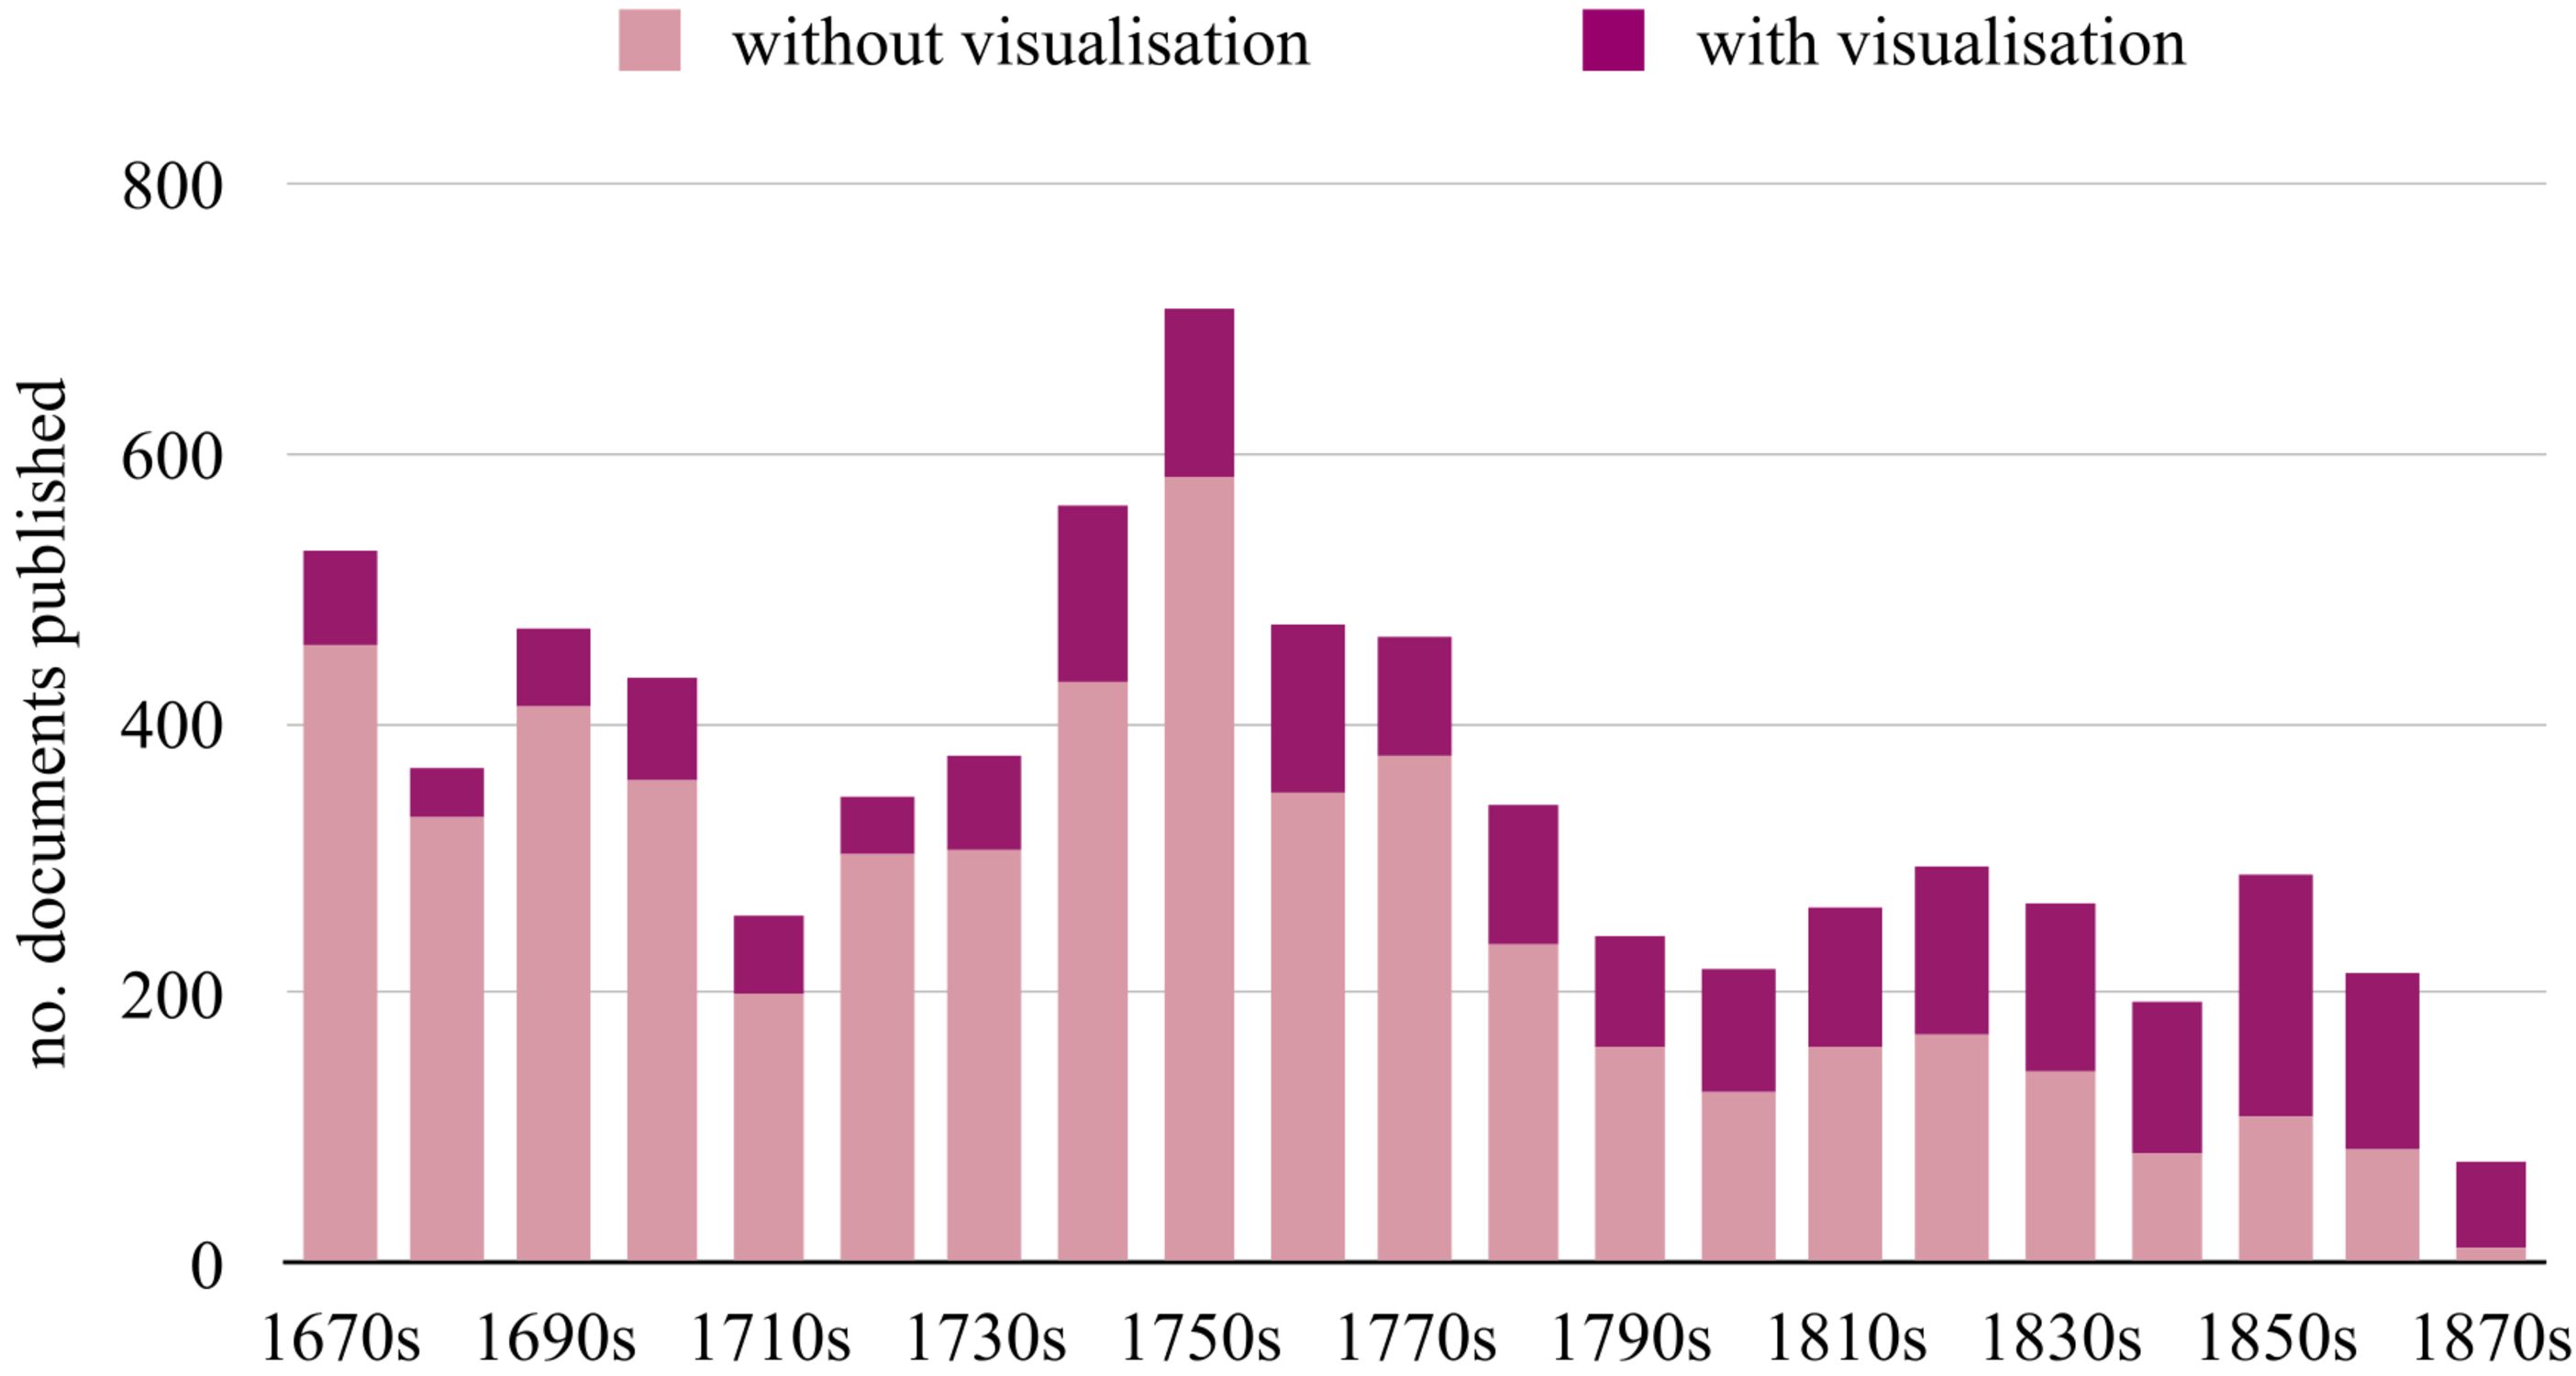 Figure 10.1. Number of documents published in the Philosophical Transactions per decade, 1670–1879